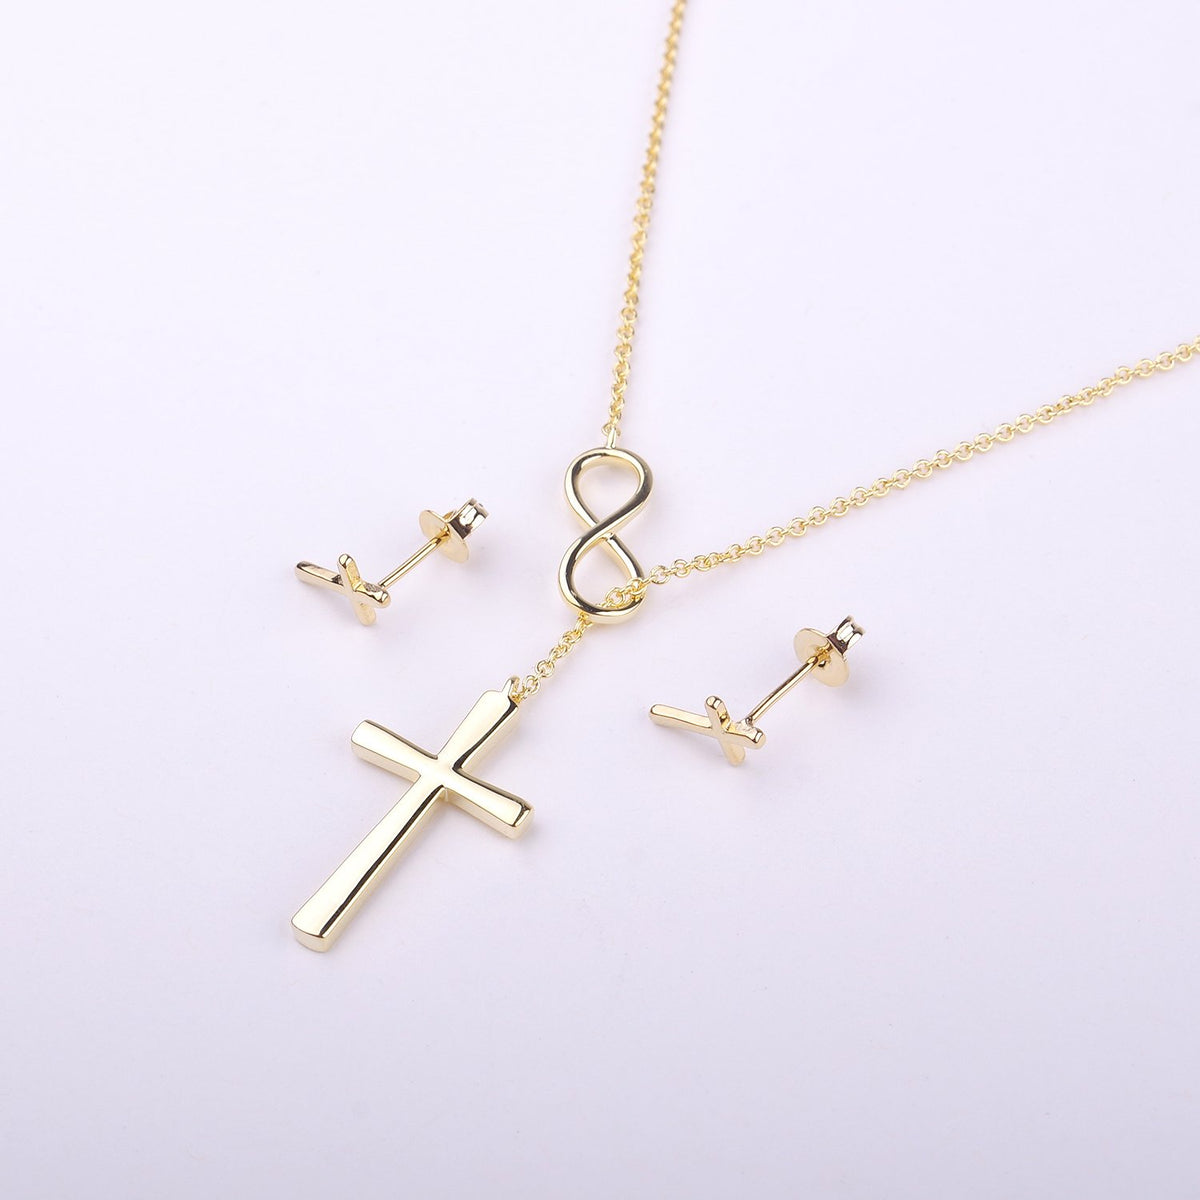 Christmas Gift for Other Mother Cross earring and Necklace Set Jewelry Set